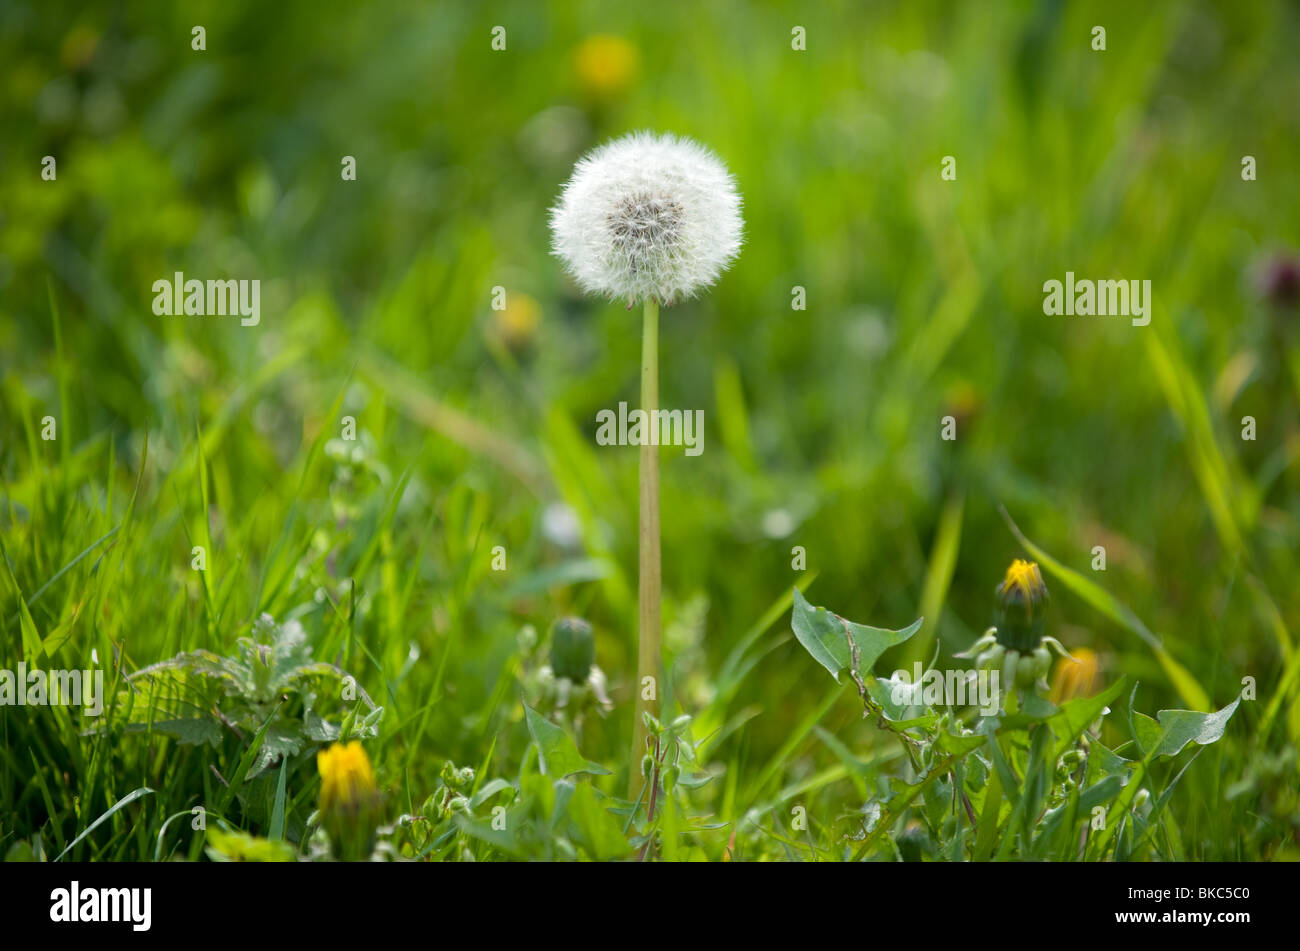 A single dandelion seed head on its own in the spring grass, 2010 Stock Photo